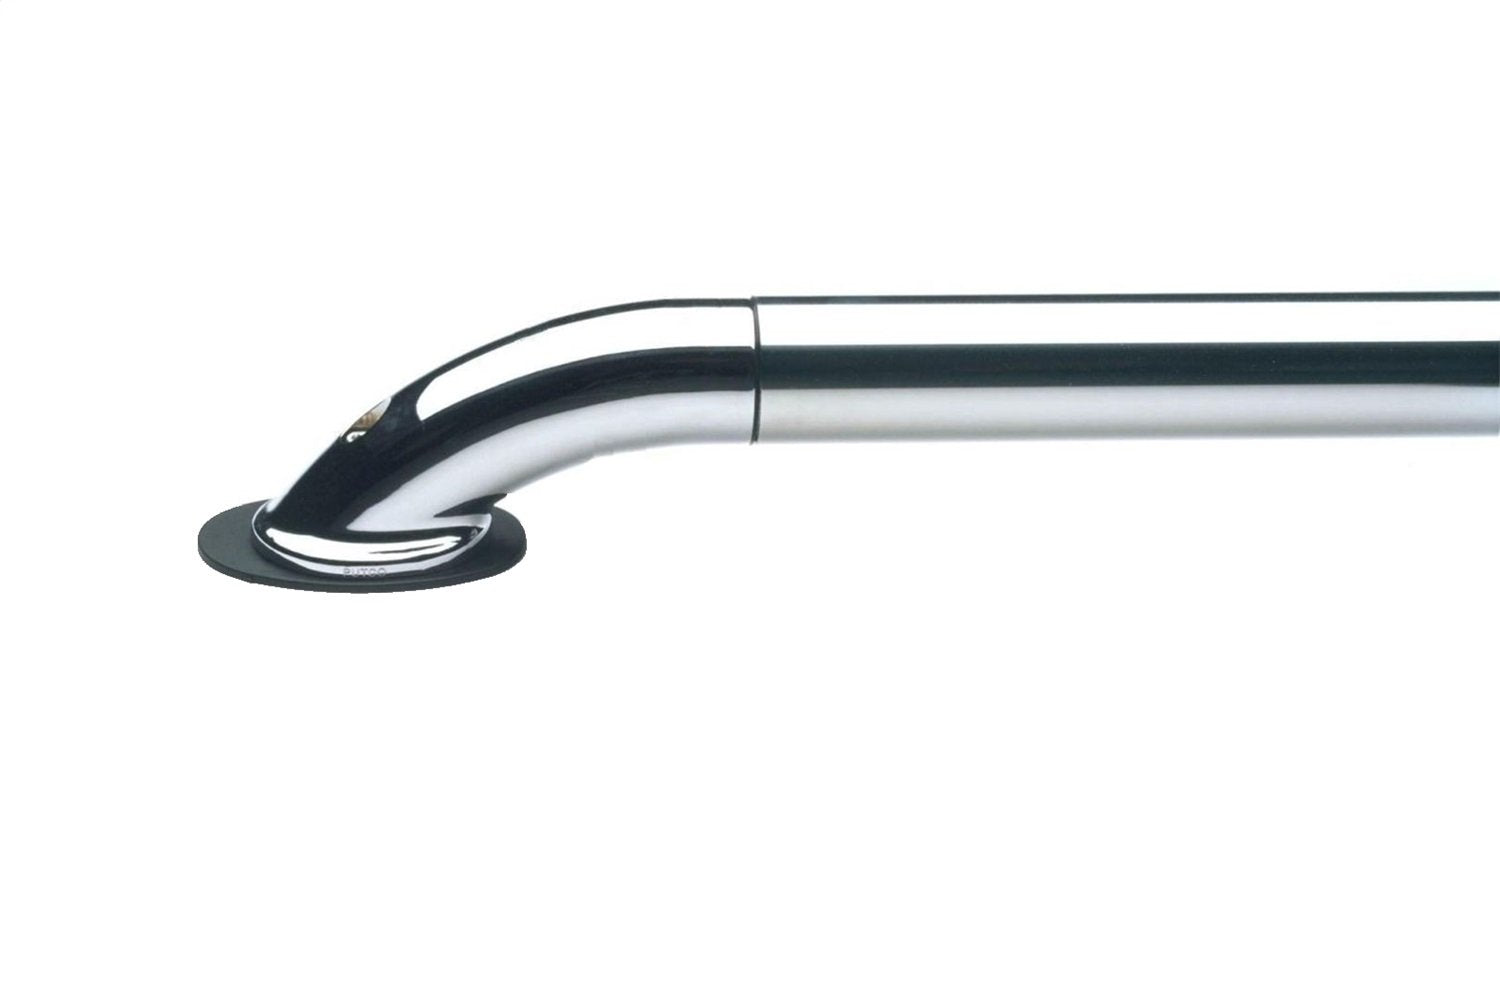 Putco 59862 Bed Rails, approx. 5 ft. 7 in. Polished